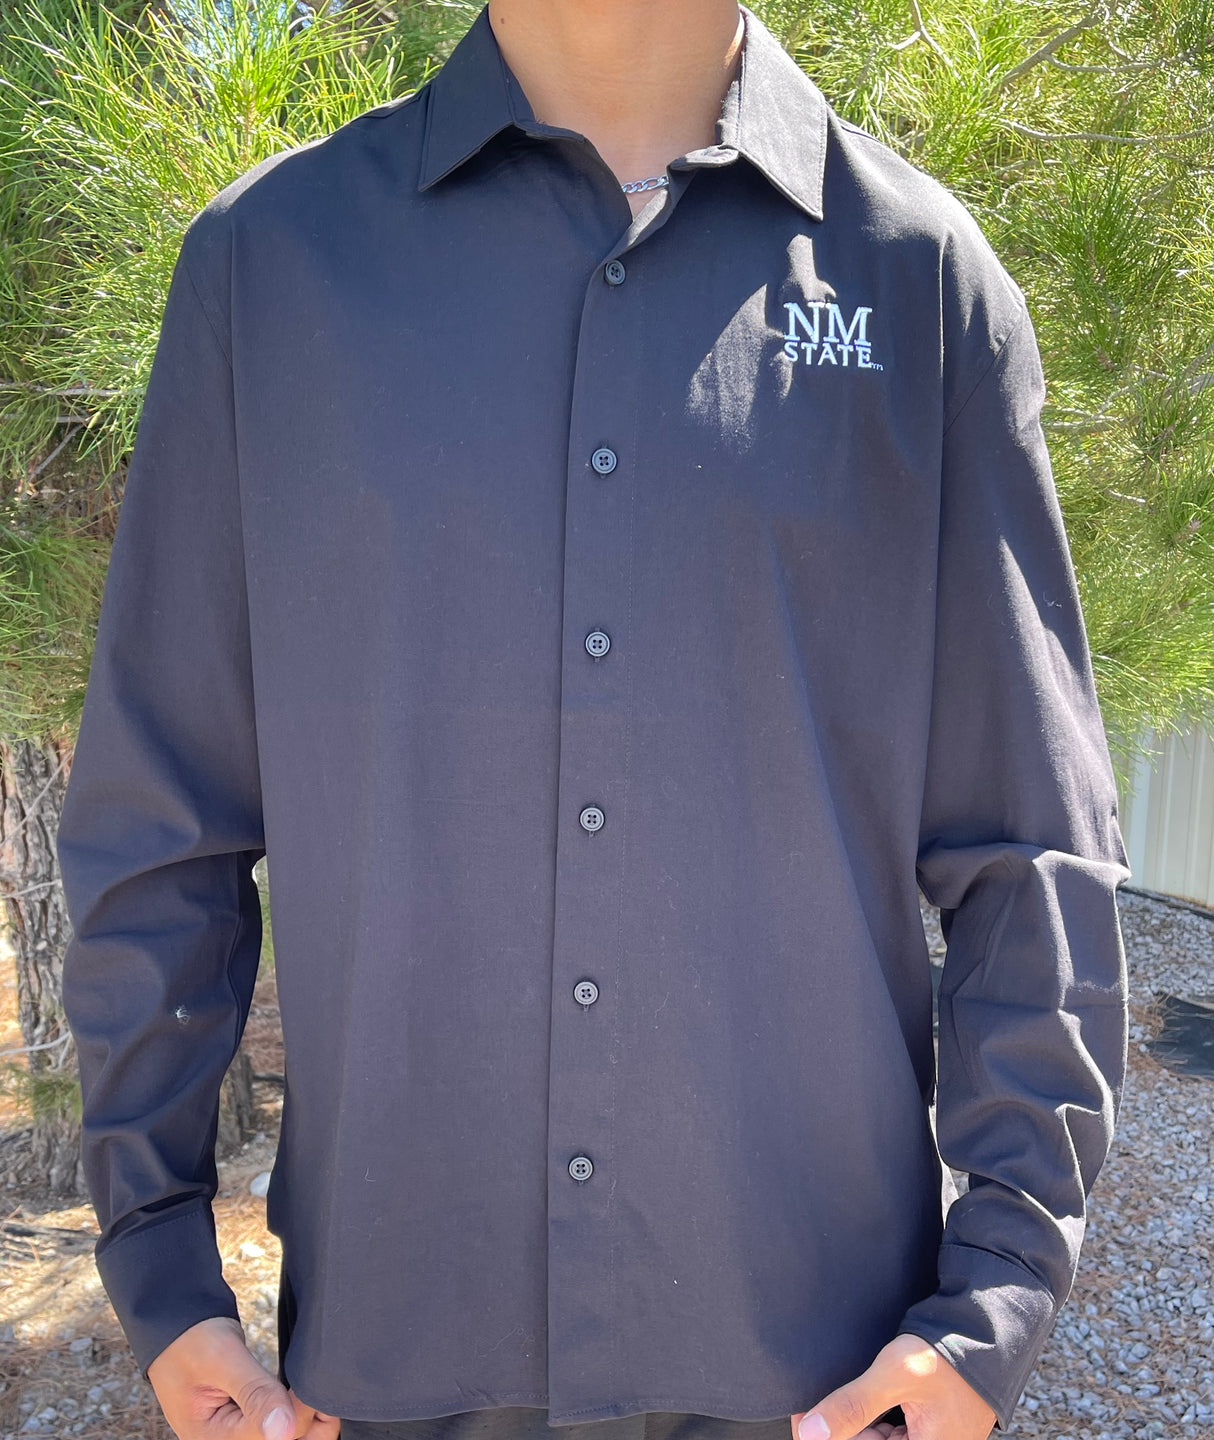 NM State Men's Motivate Button Up